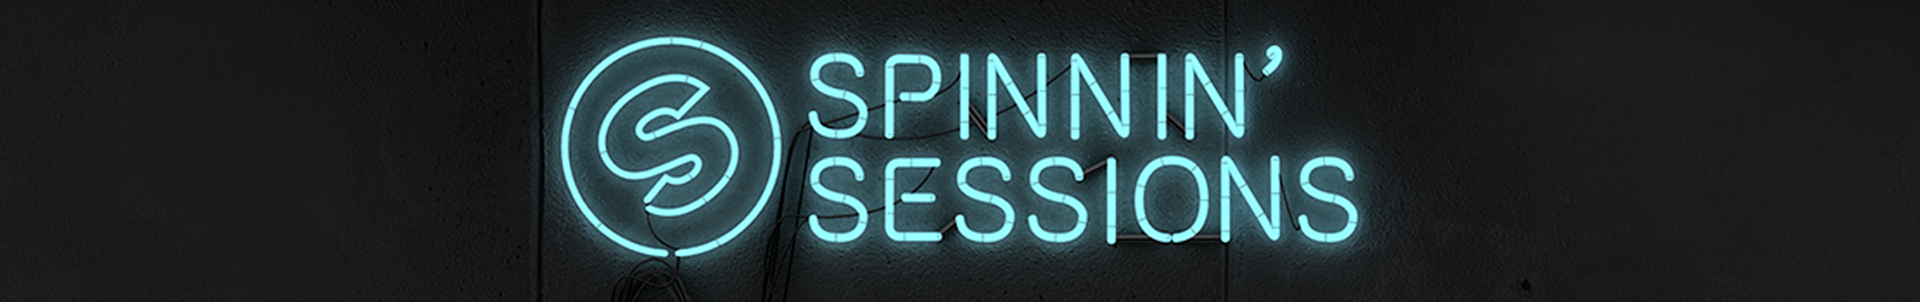 New update for Spinnin' Sessions radio show